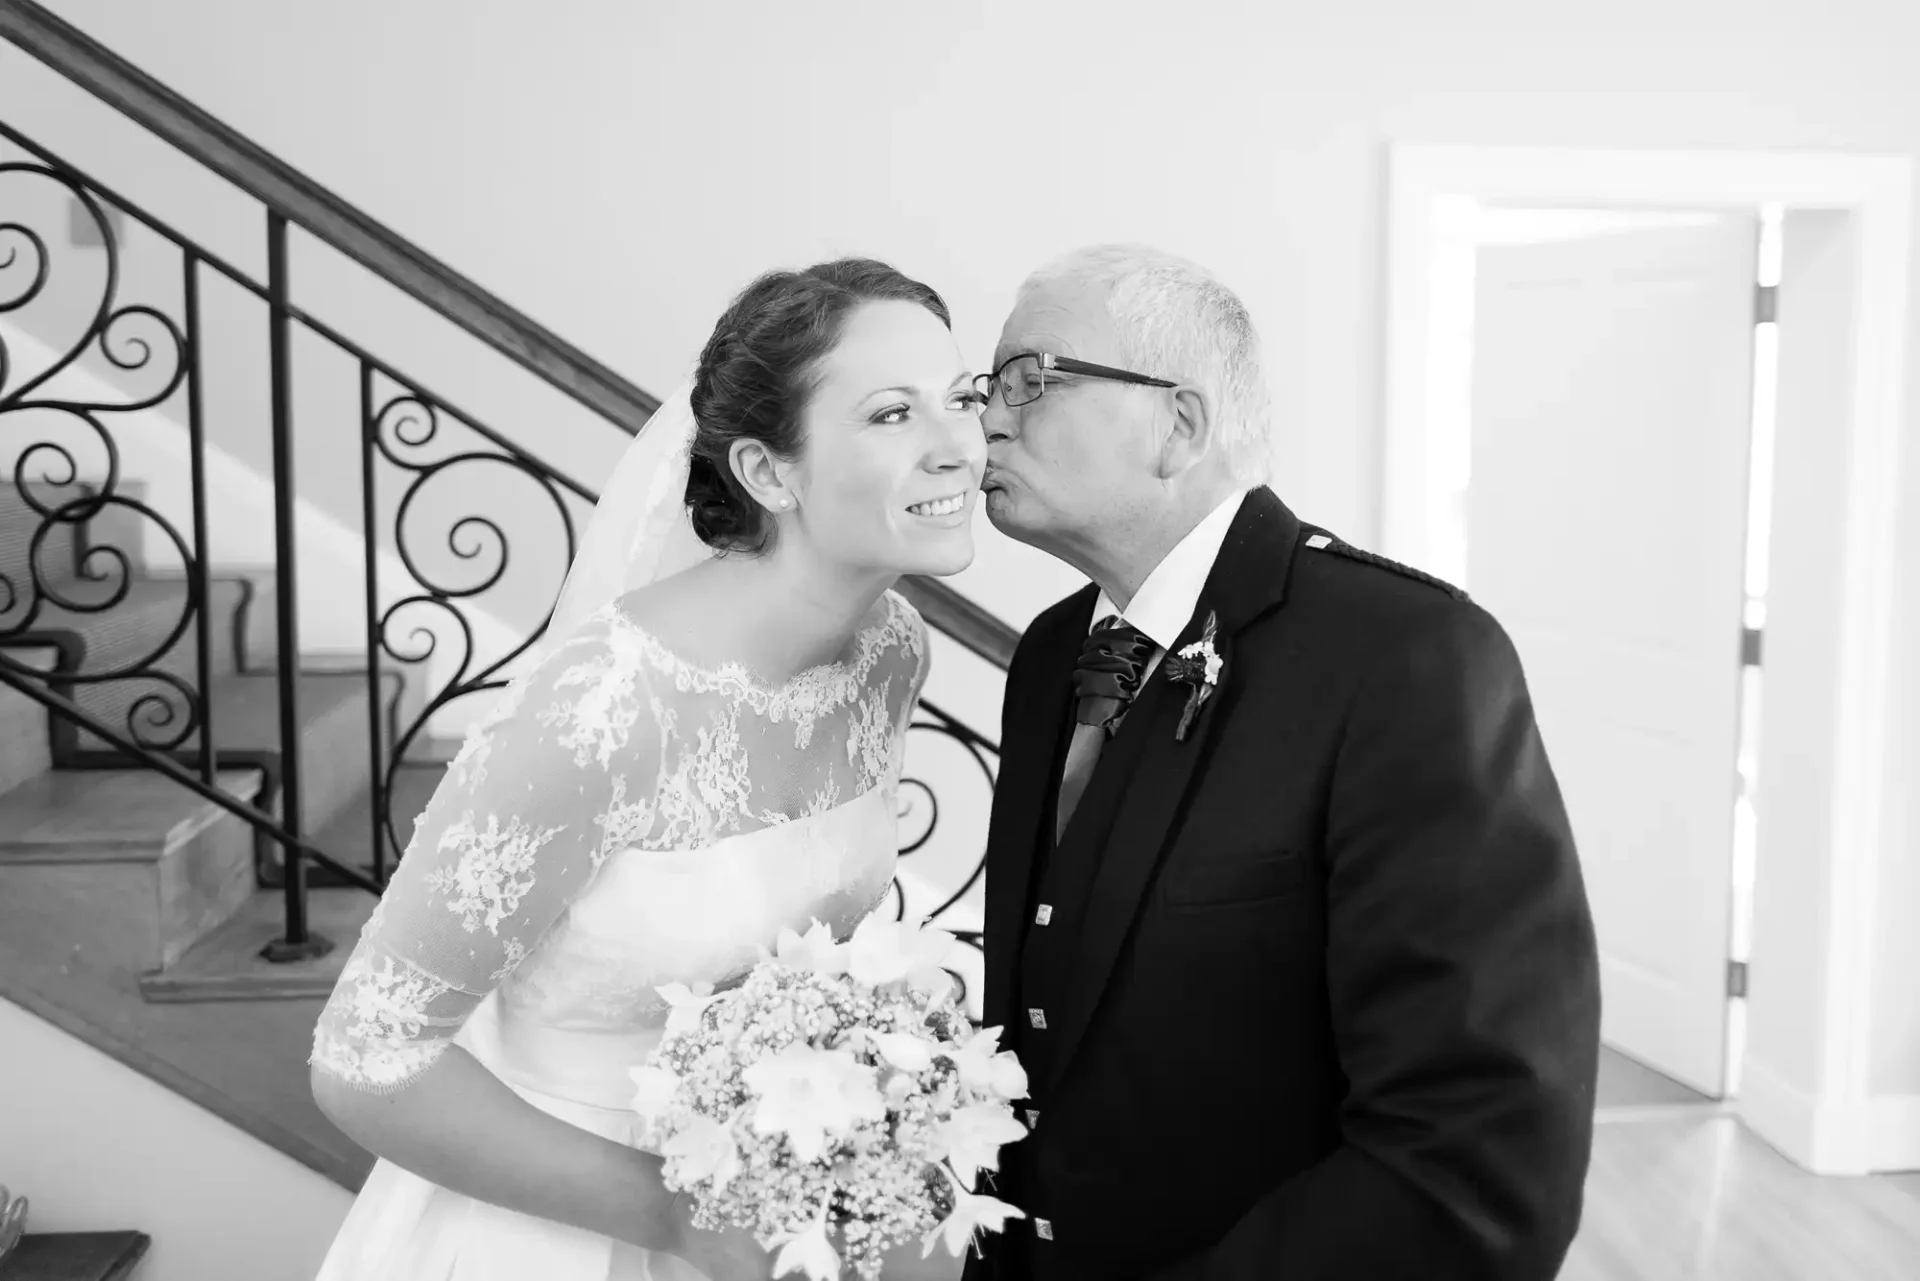 A bride in a lace dress holding a bouquet receives a kiss on the cheek from an older man in a tuxedo on a staircase.